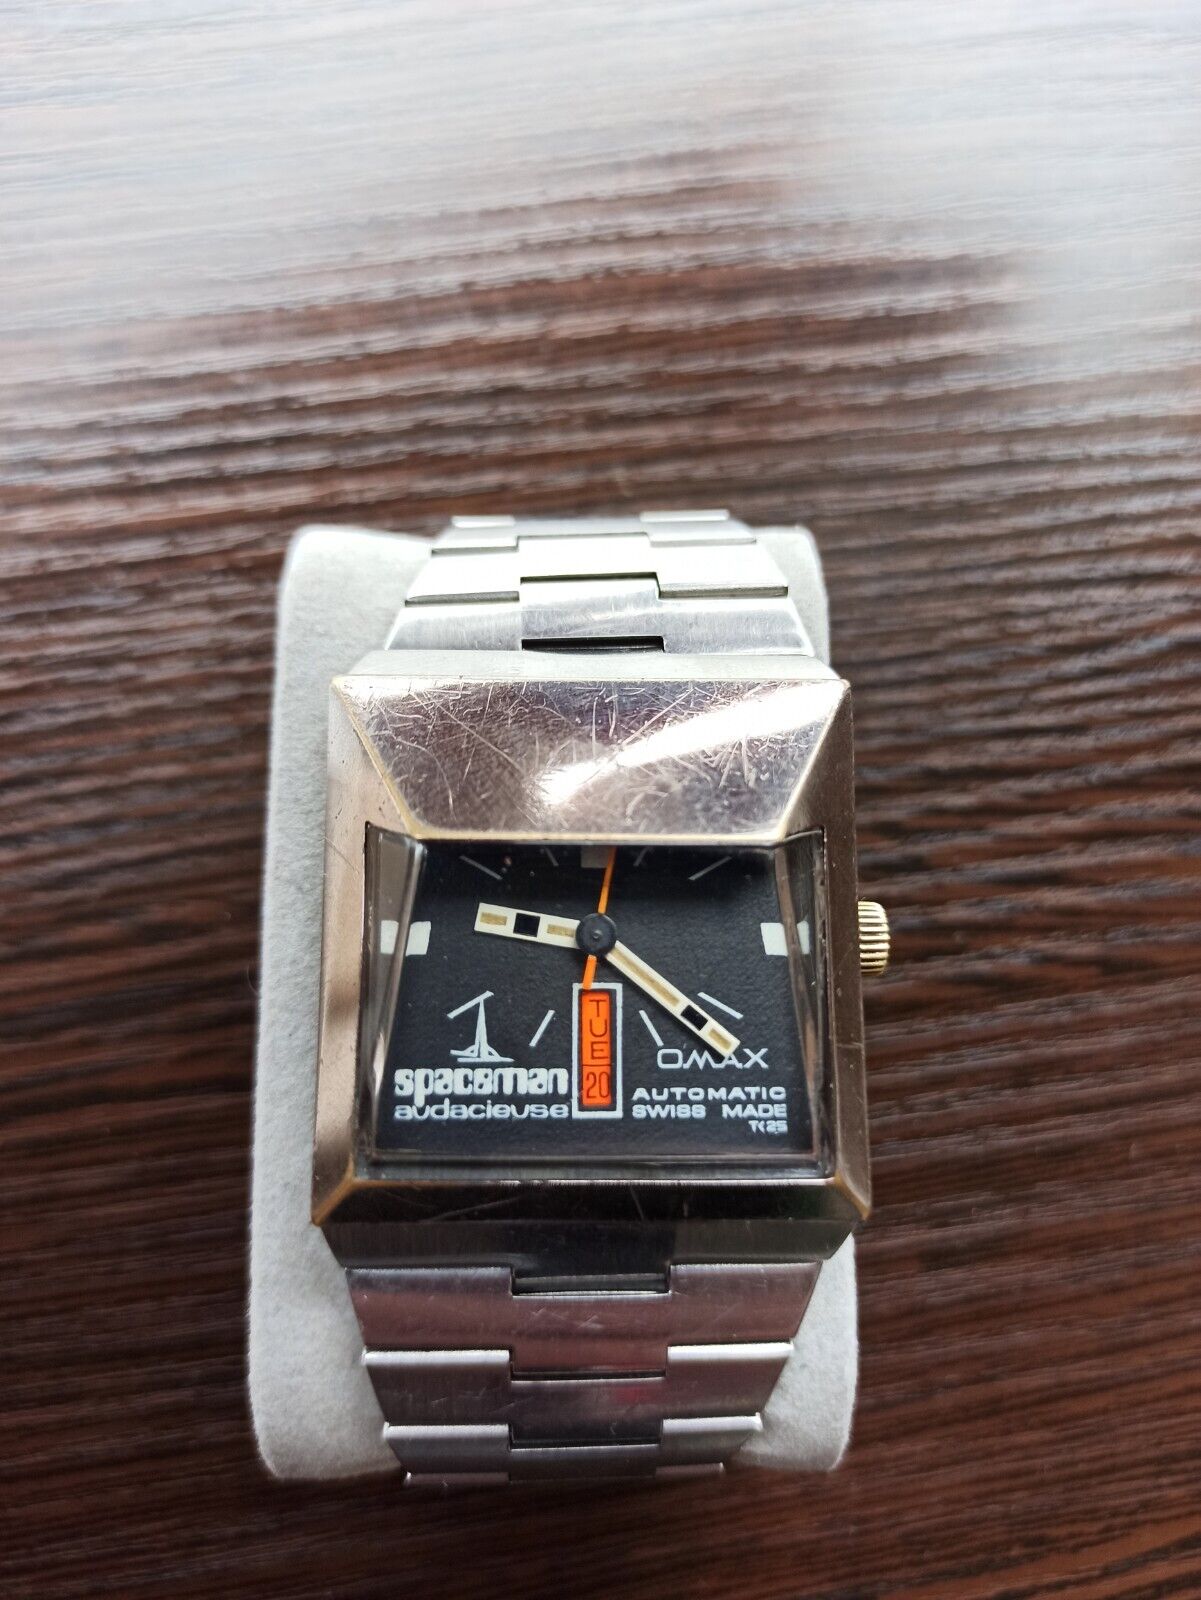 OMAX SPACEMAN AUDACIEUSE automatic Watch Swiss Made 